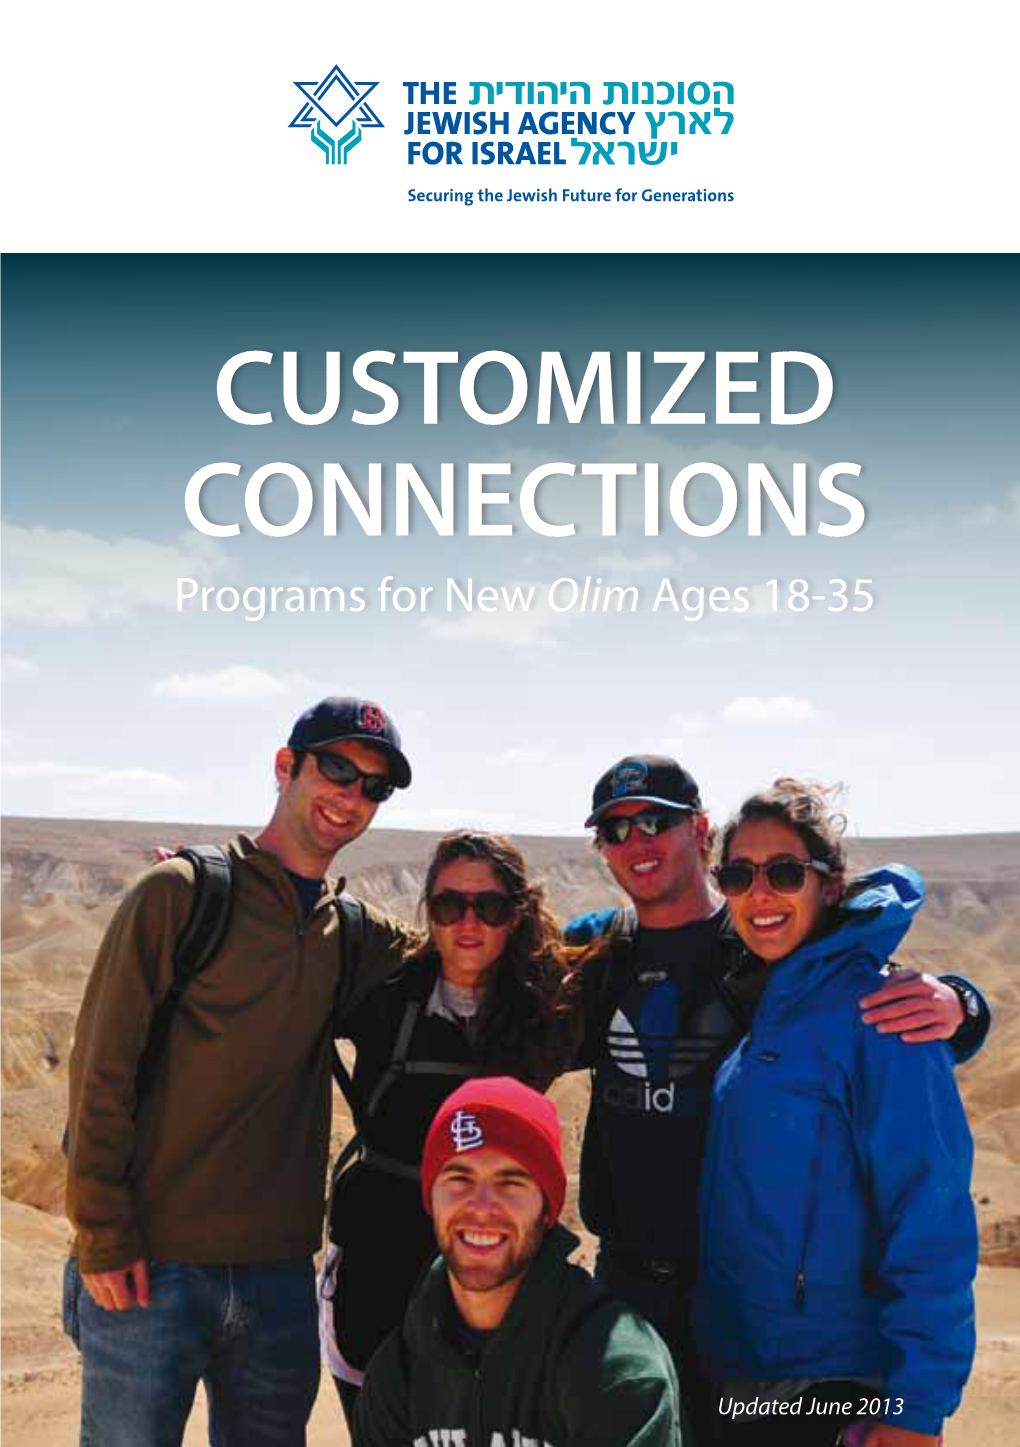 CUSTOMIZED CONNECTIONS Programs for New Olim Ages 18-35